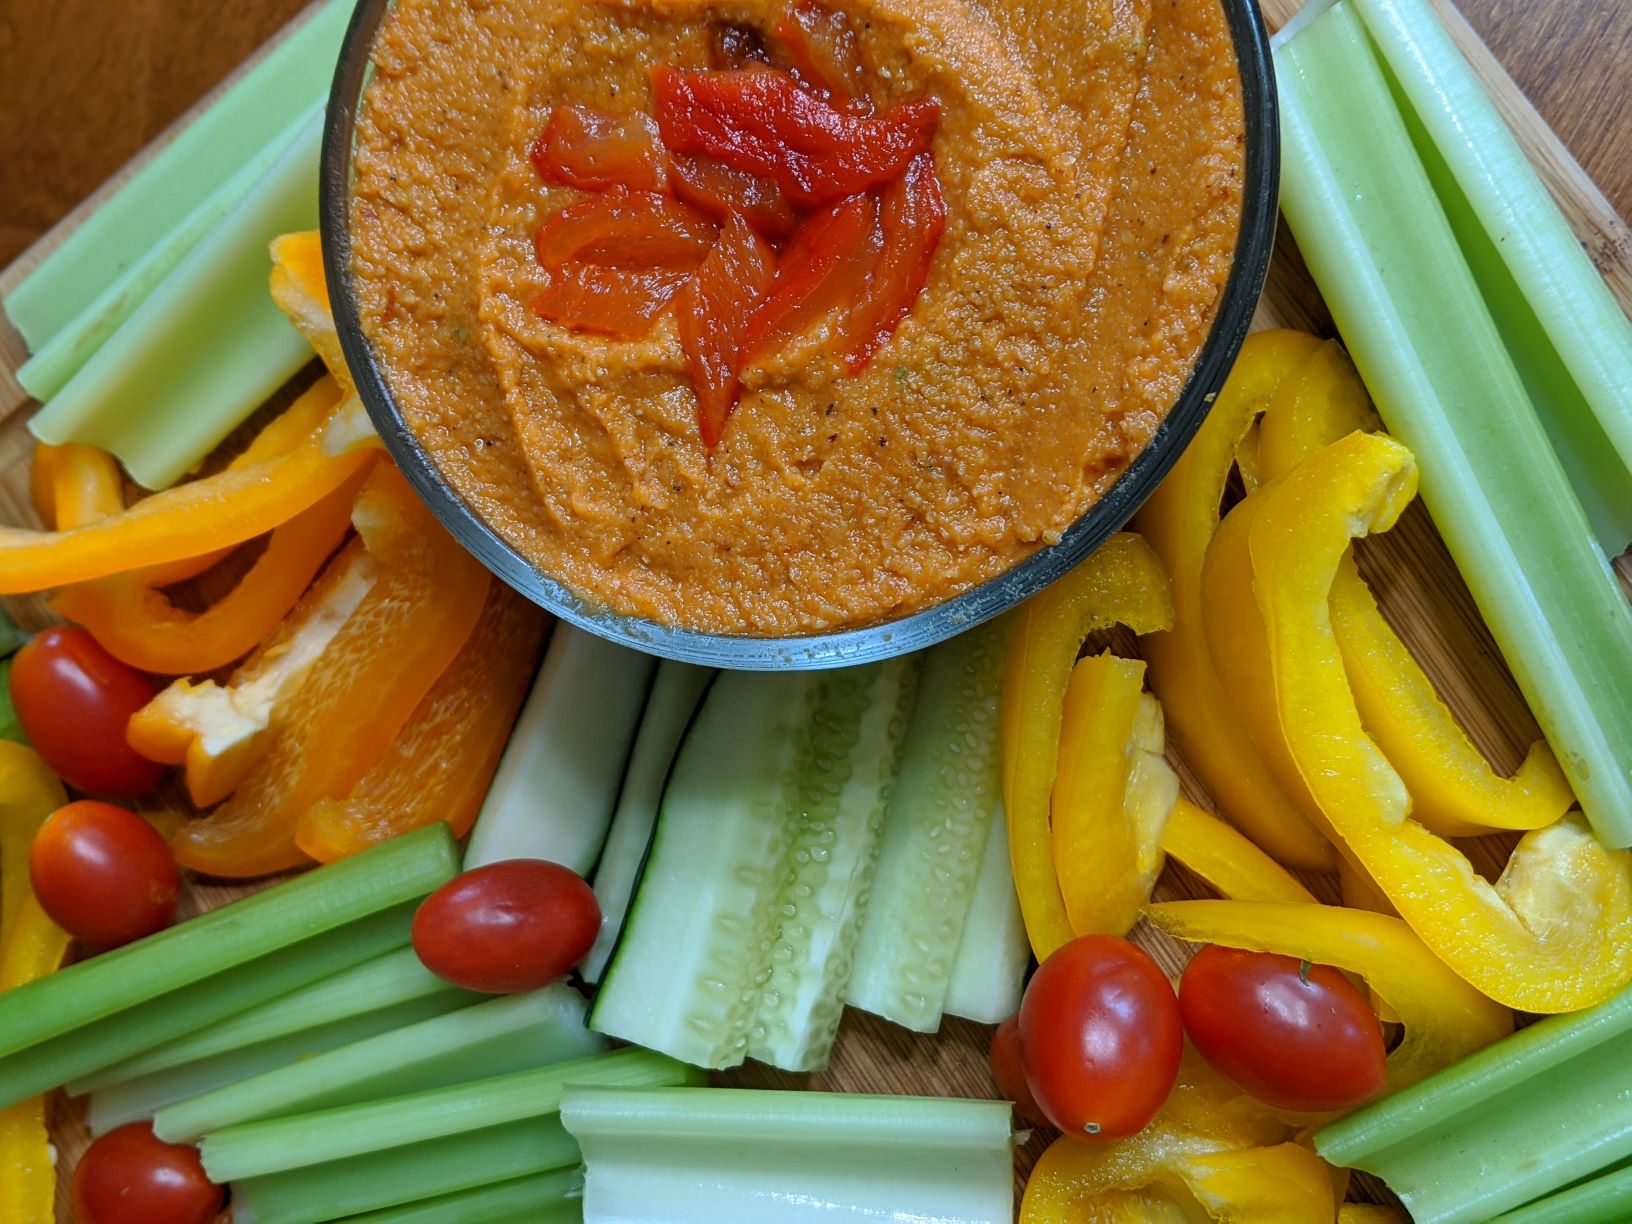 Spicy Red Pepper Hummus